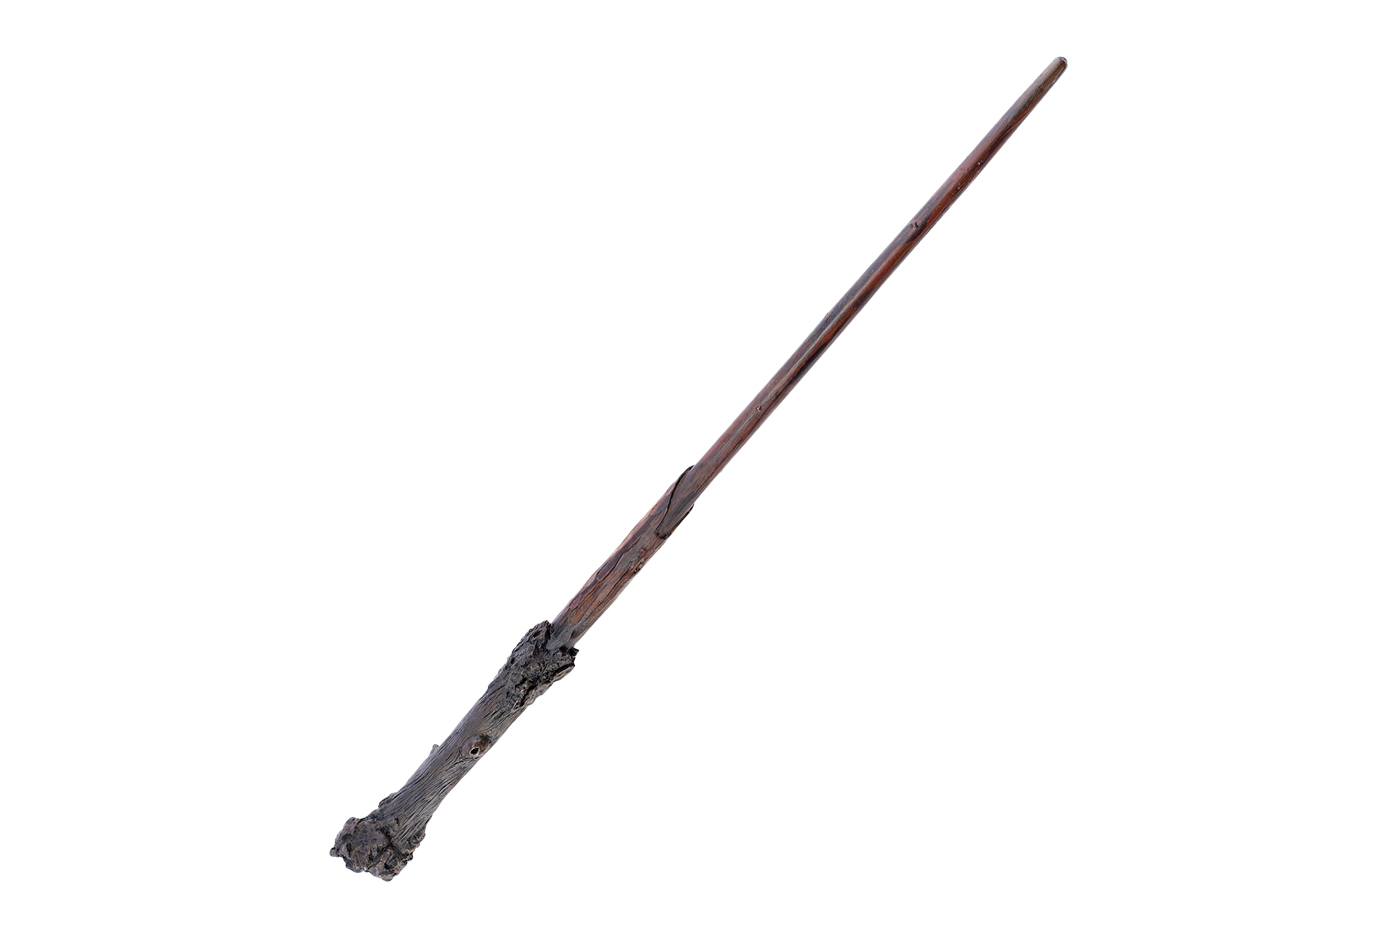 Daniel Radcliffe's wand from Deathly Hallows